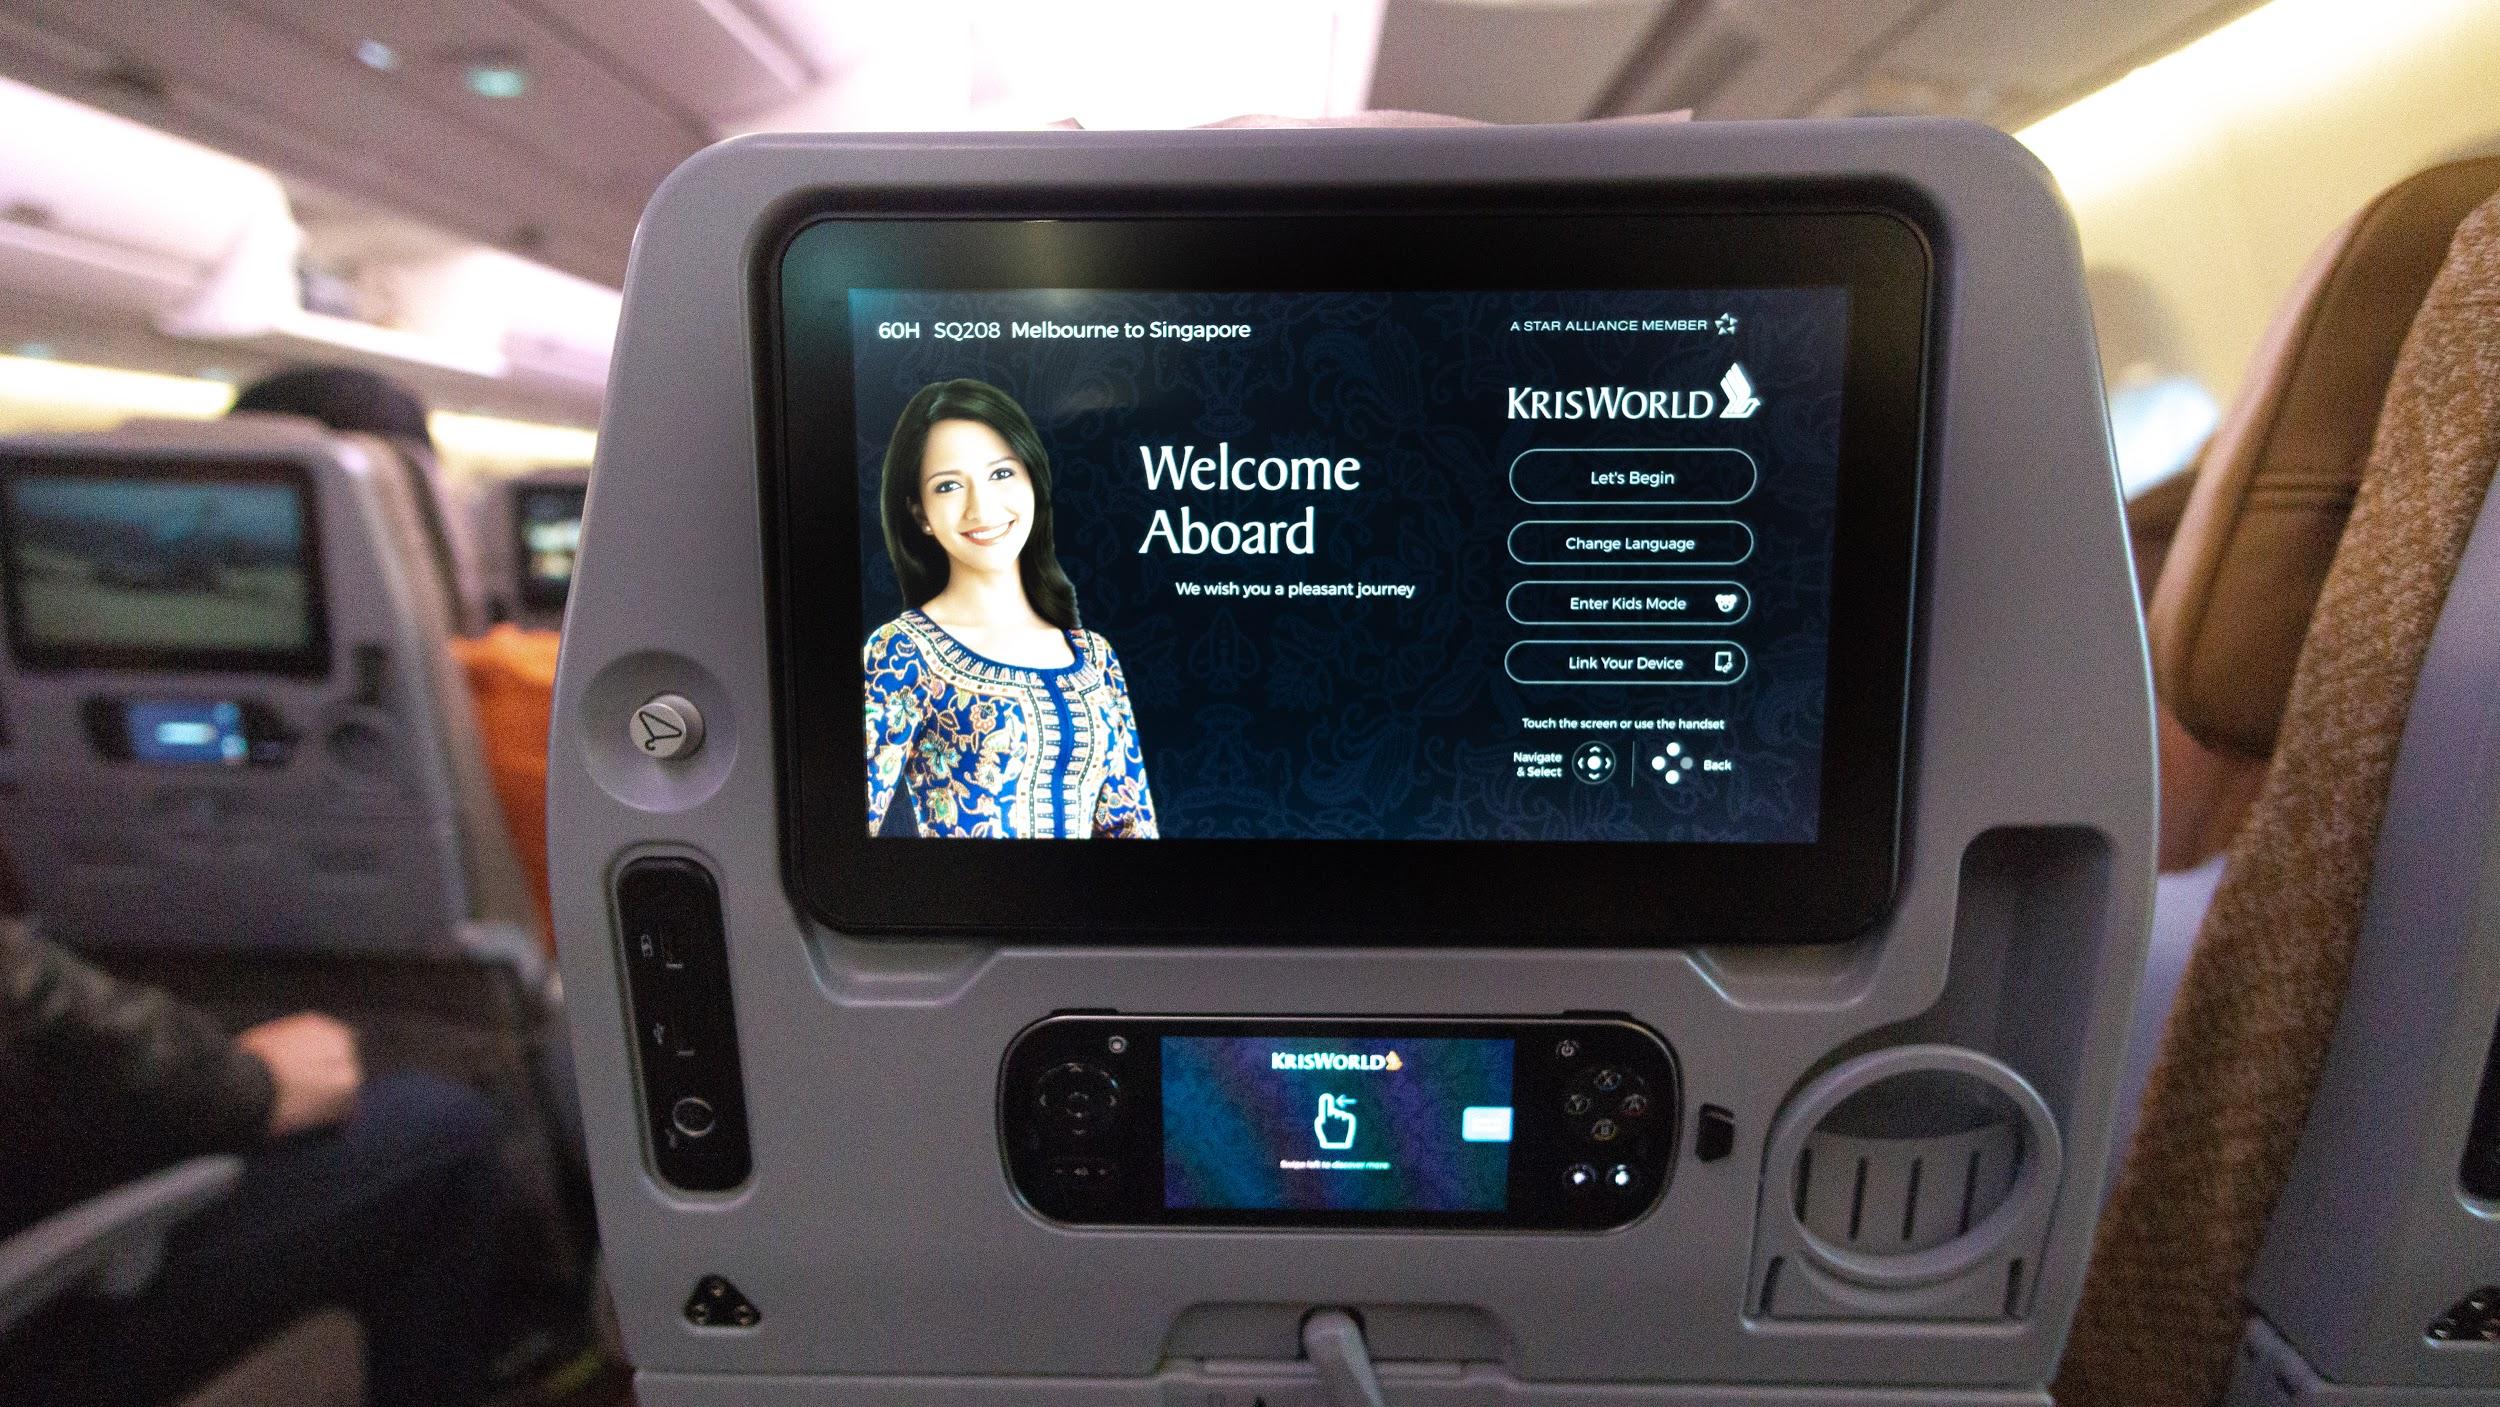 Singapore Airlines A350 Economy inflight entertainment